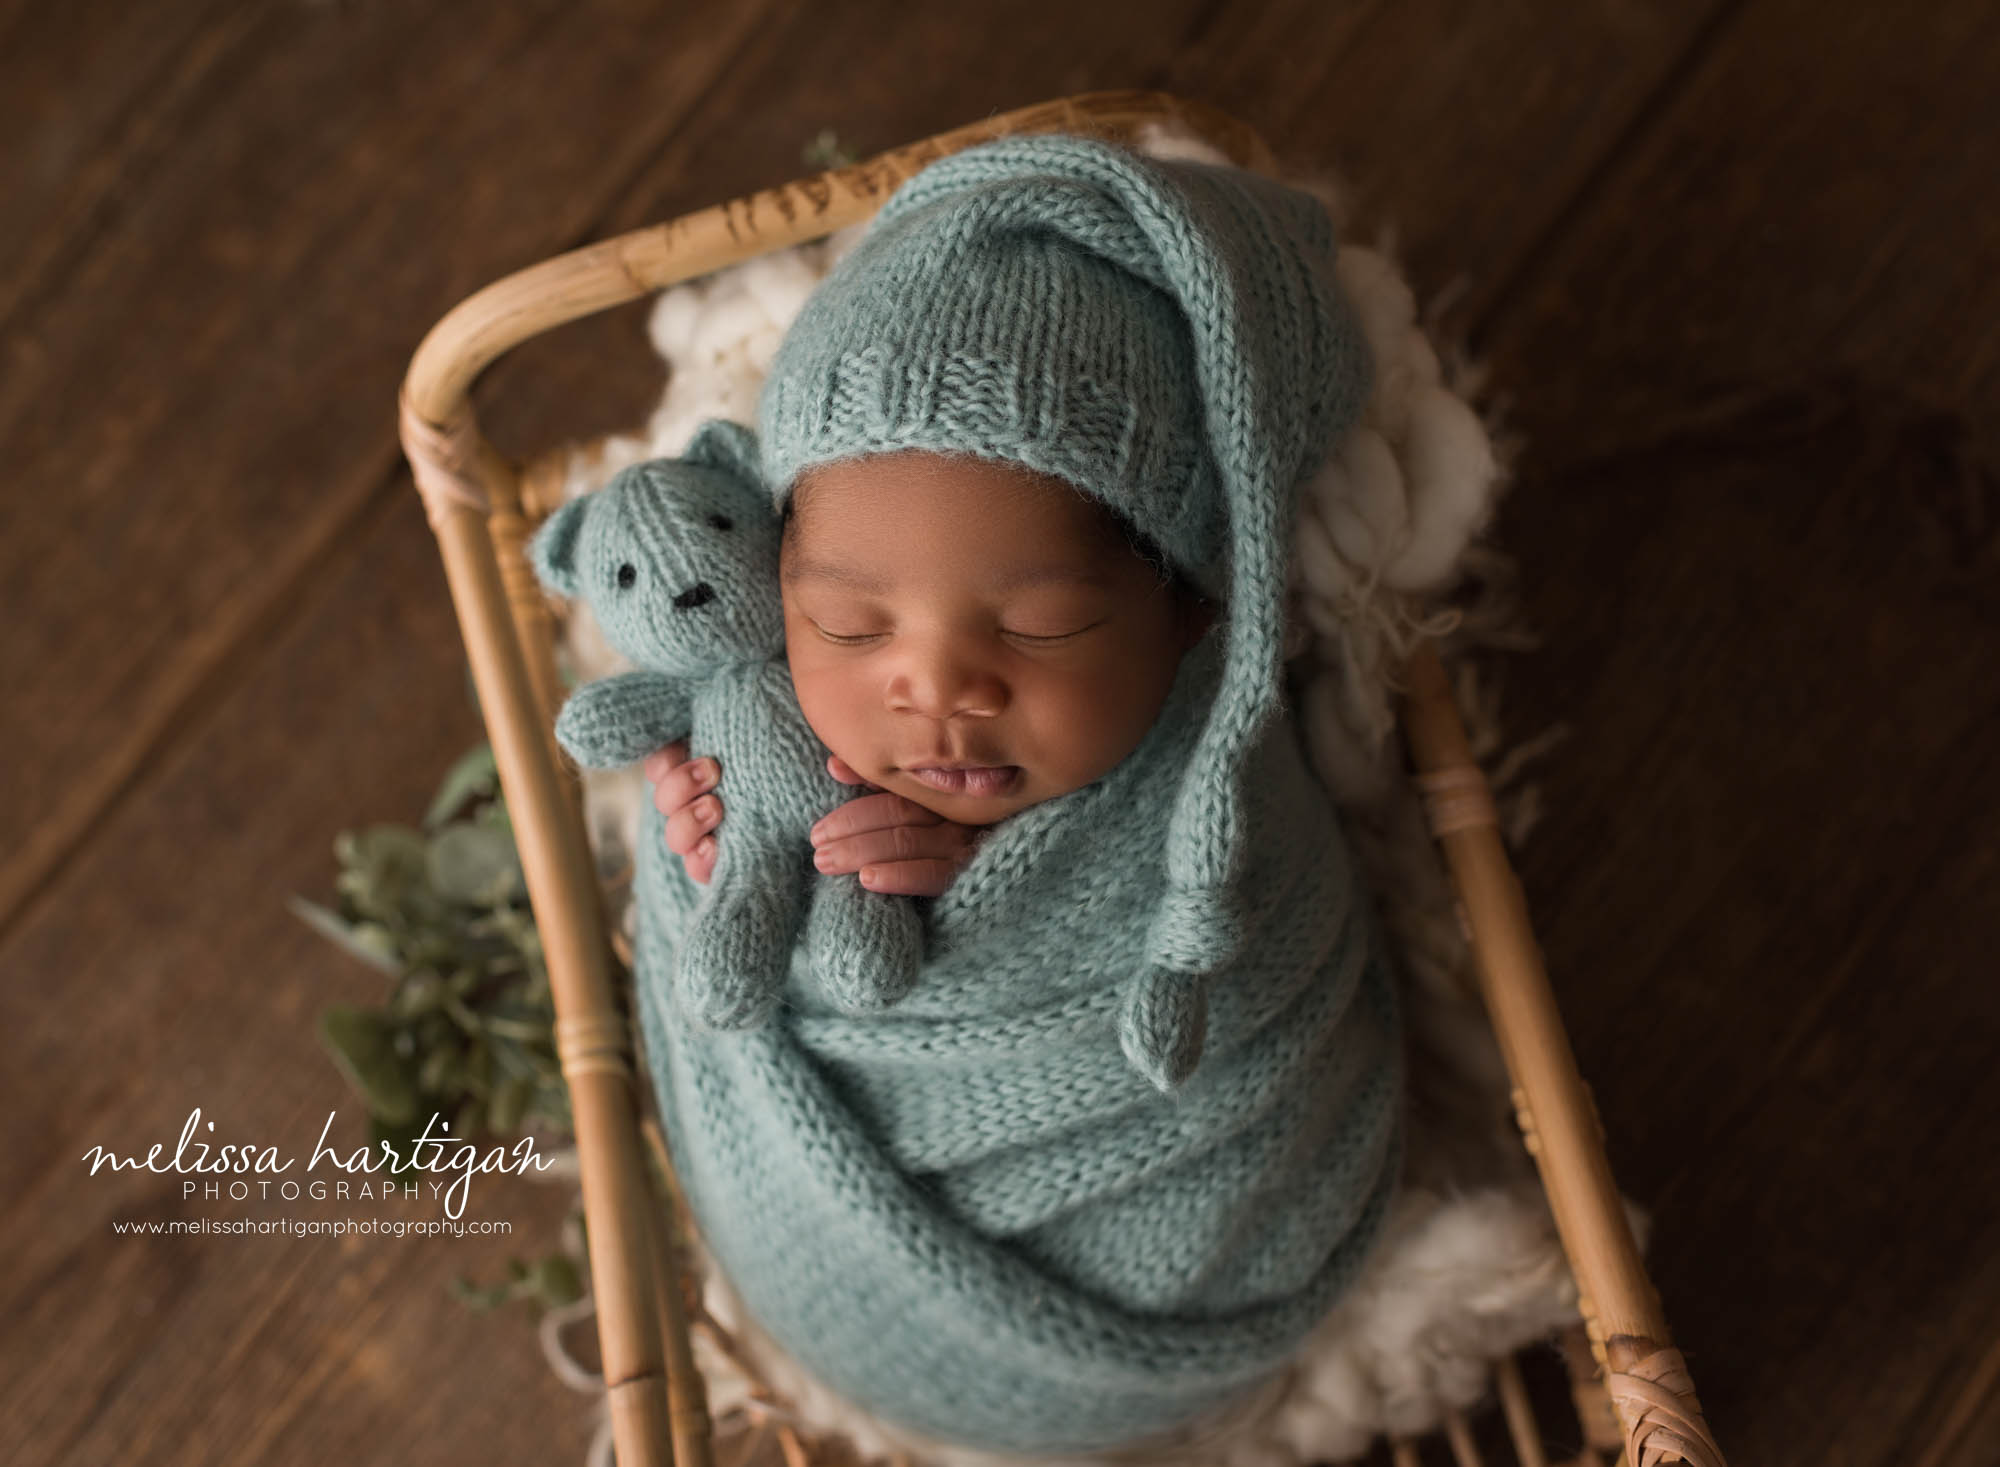 newborn baby boy wrapped in green knitted wrap with knitted sleepy cap and matching teddy